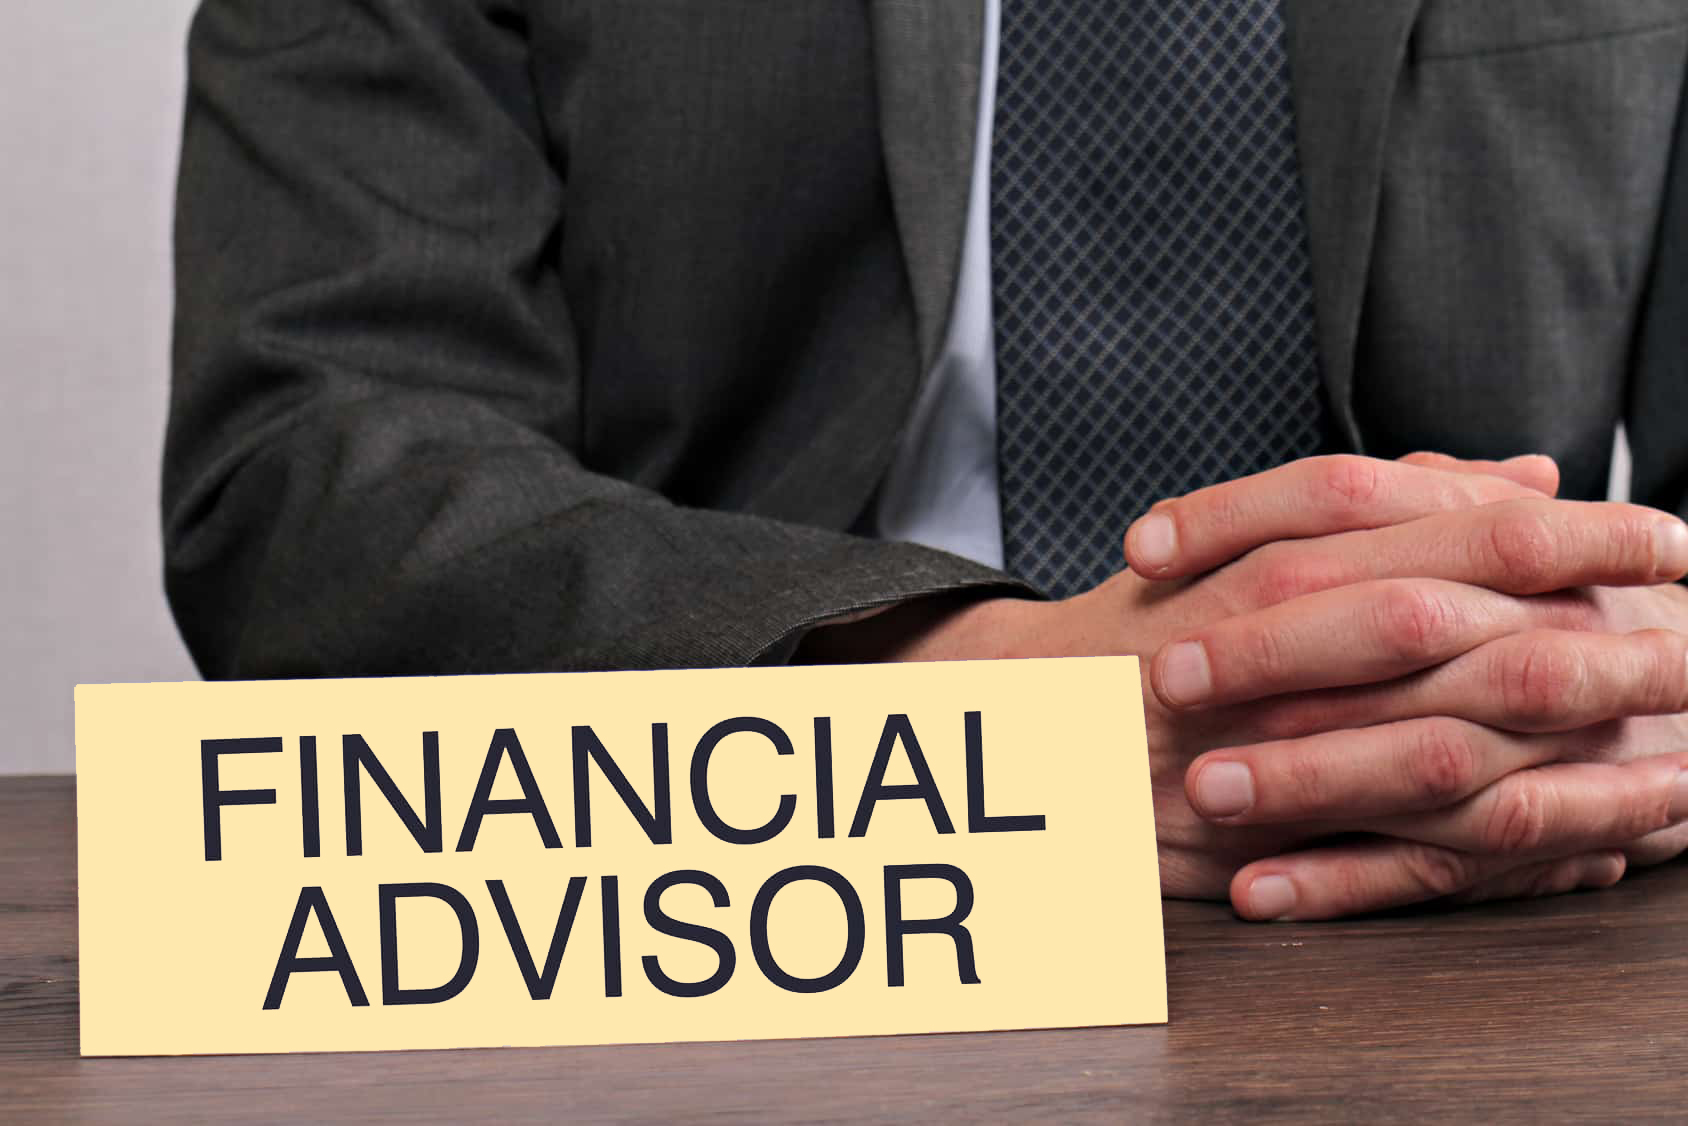 is-it-okay-to-blindly-follow-financial-advisors-licensed-money